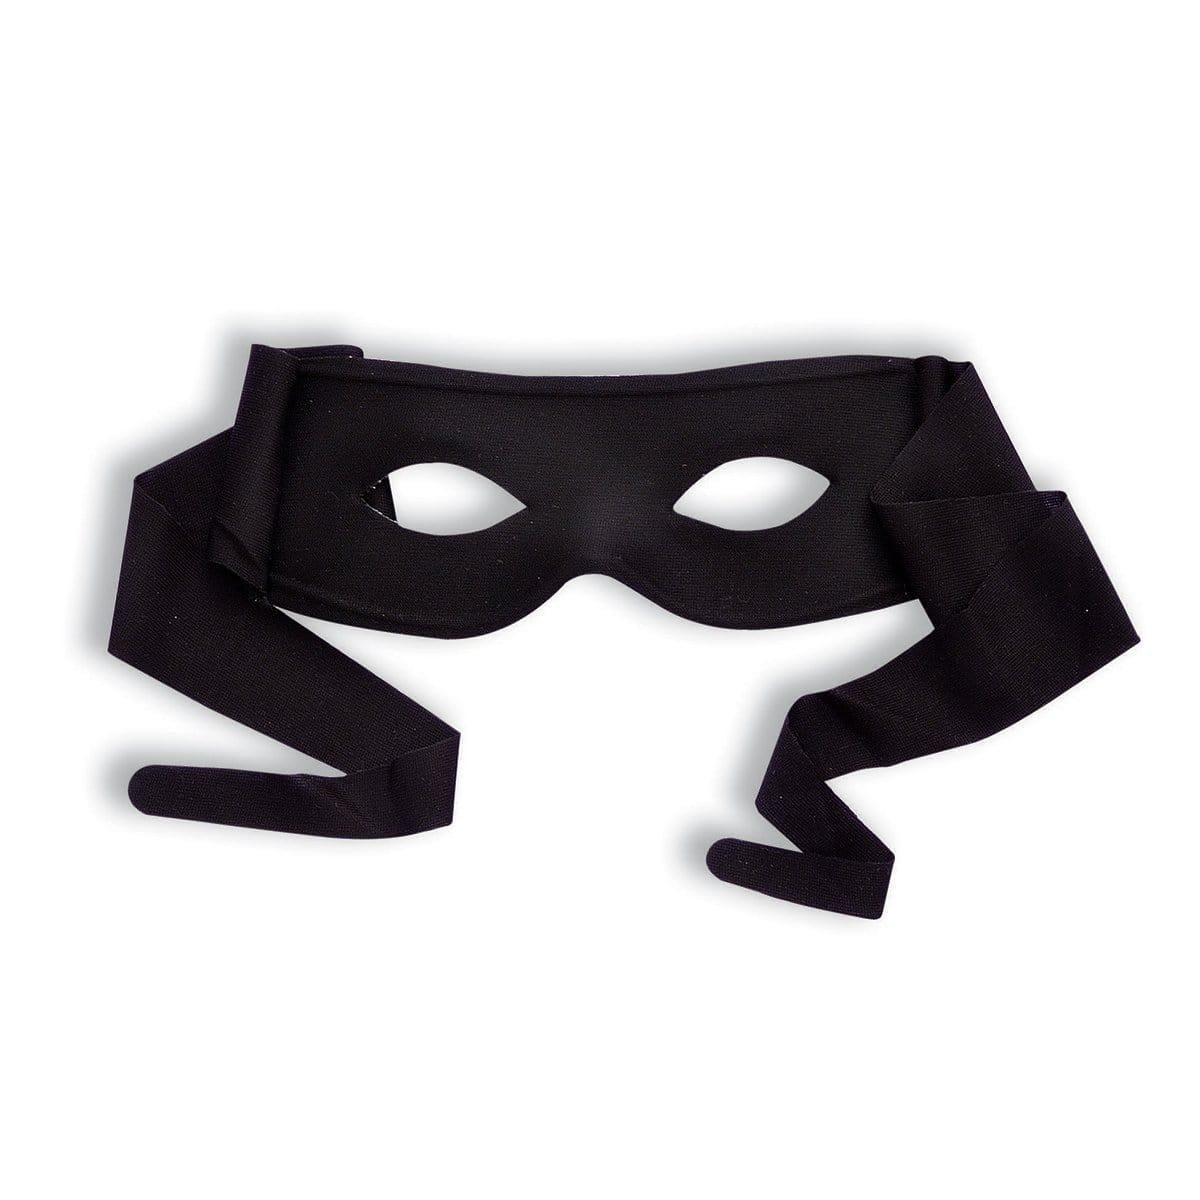 Buy Costume Accessories Black eye mask sold at Party Expert